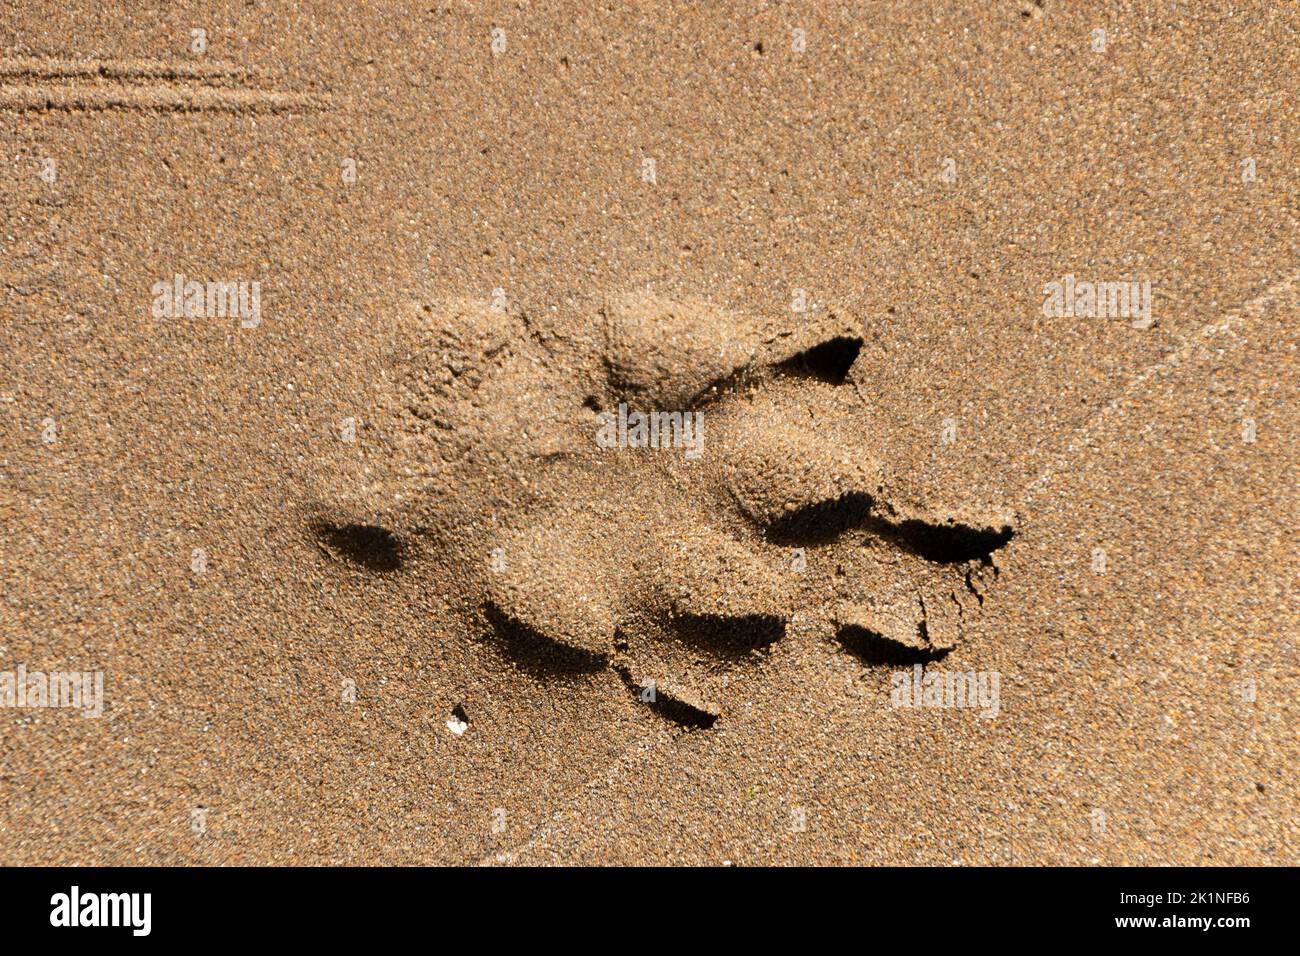 A close up view of a dog print in the beach sand Stock Photo